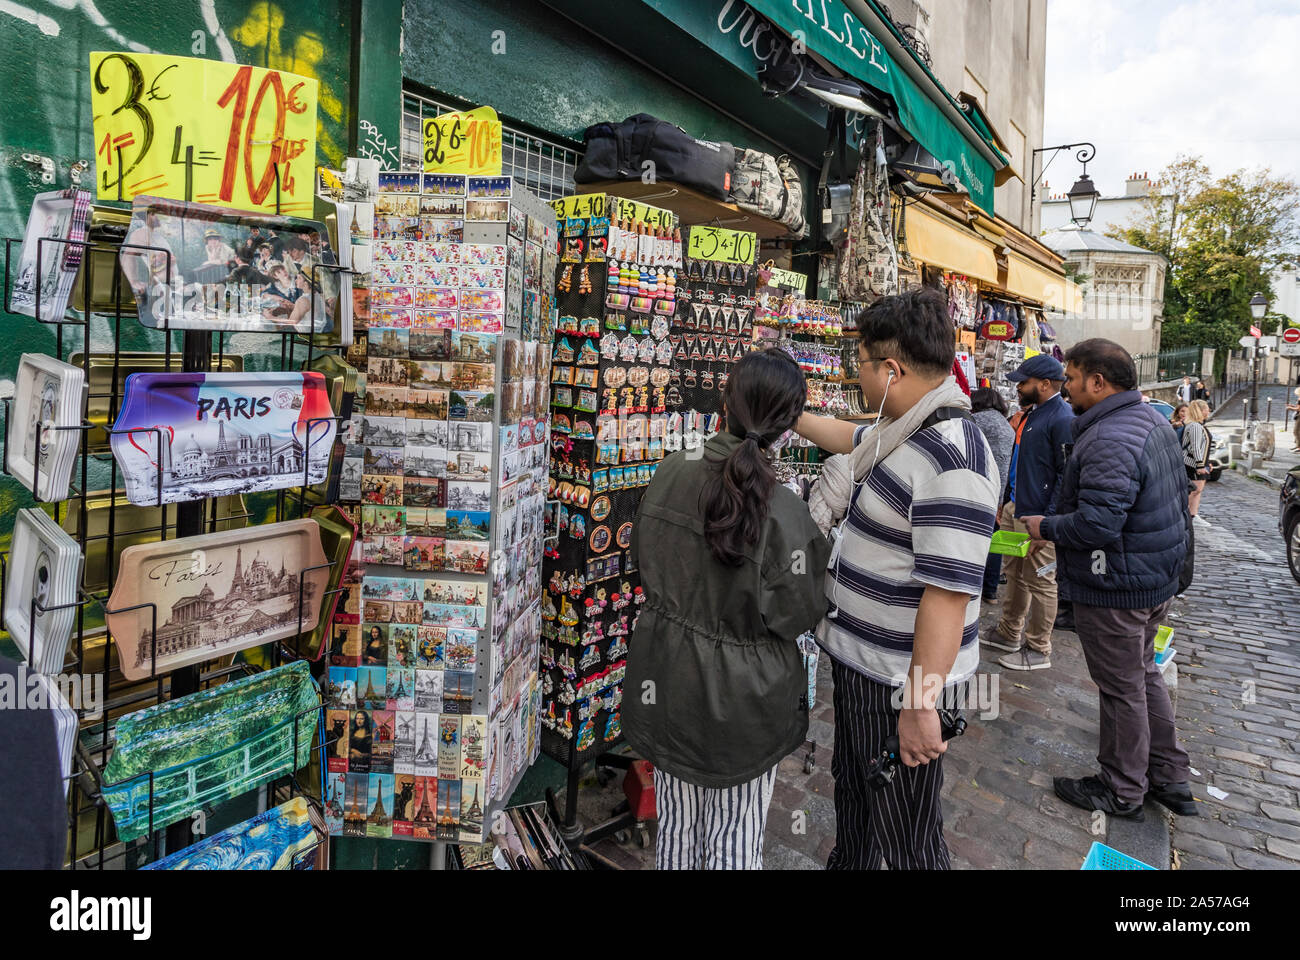 Paris, France - 30th September, 2019: tourists shopping for souvenir keyrings in the touristic area of montmartre in Paris Stock Photo